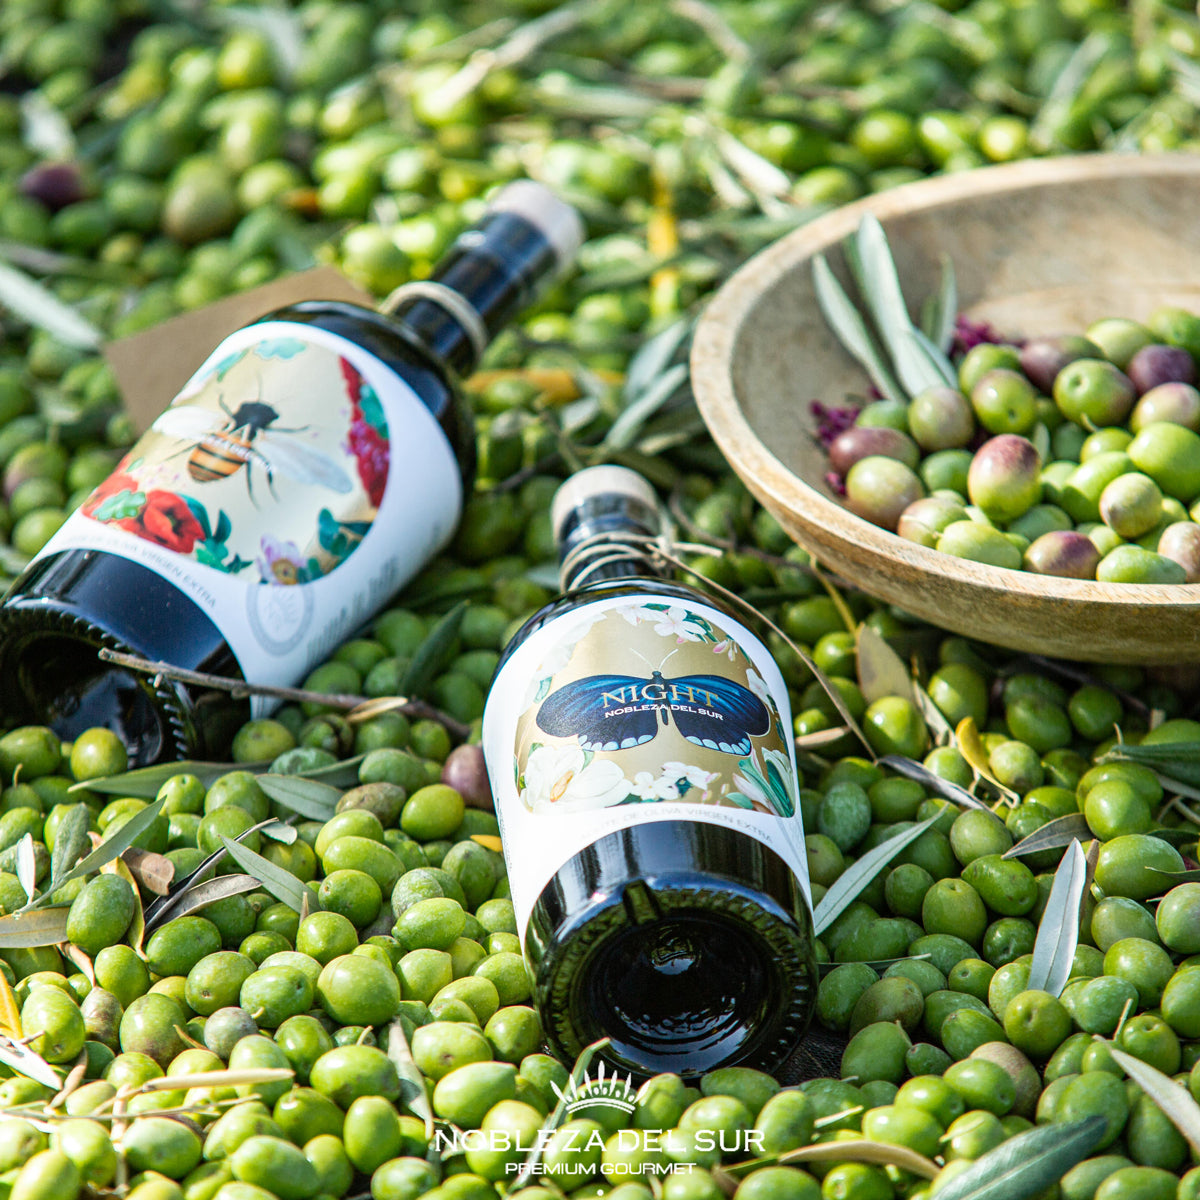 Nobleza Del Sur Organic Extra Virgin Olive Oil Day Early Harvest